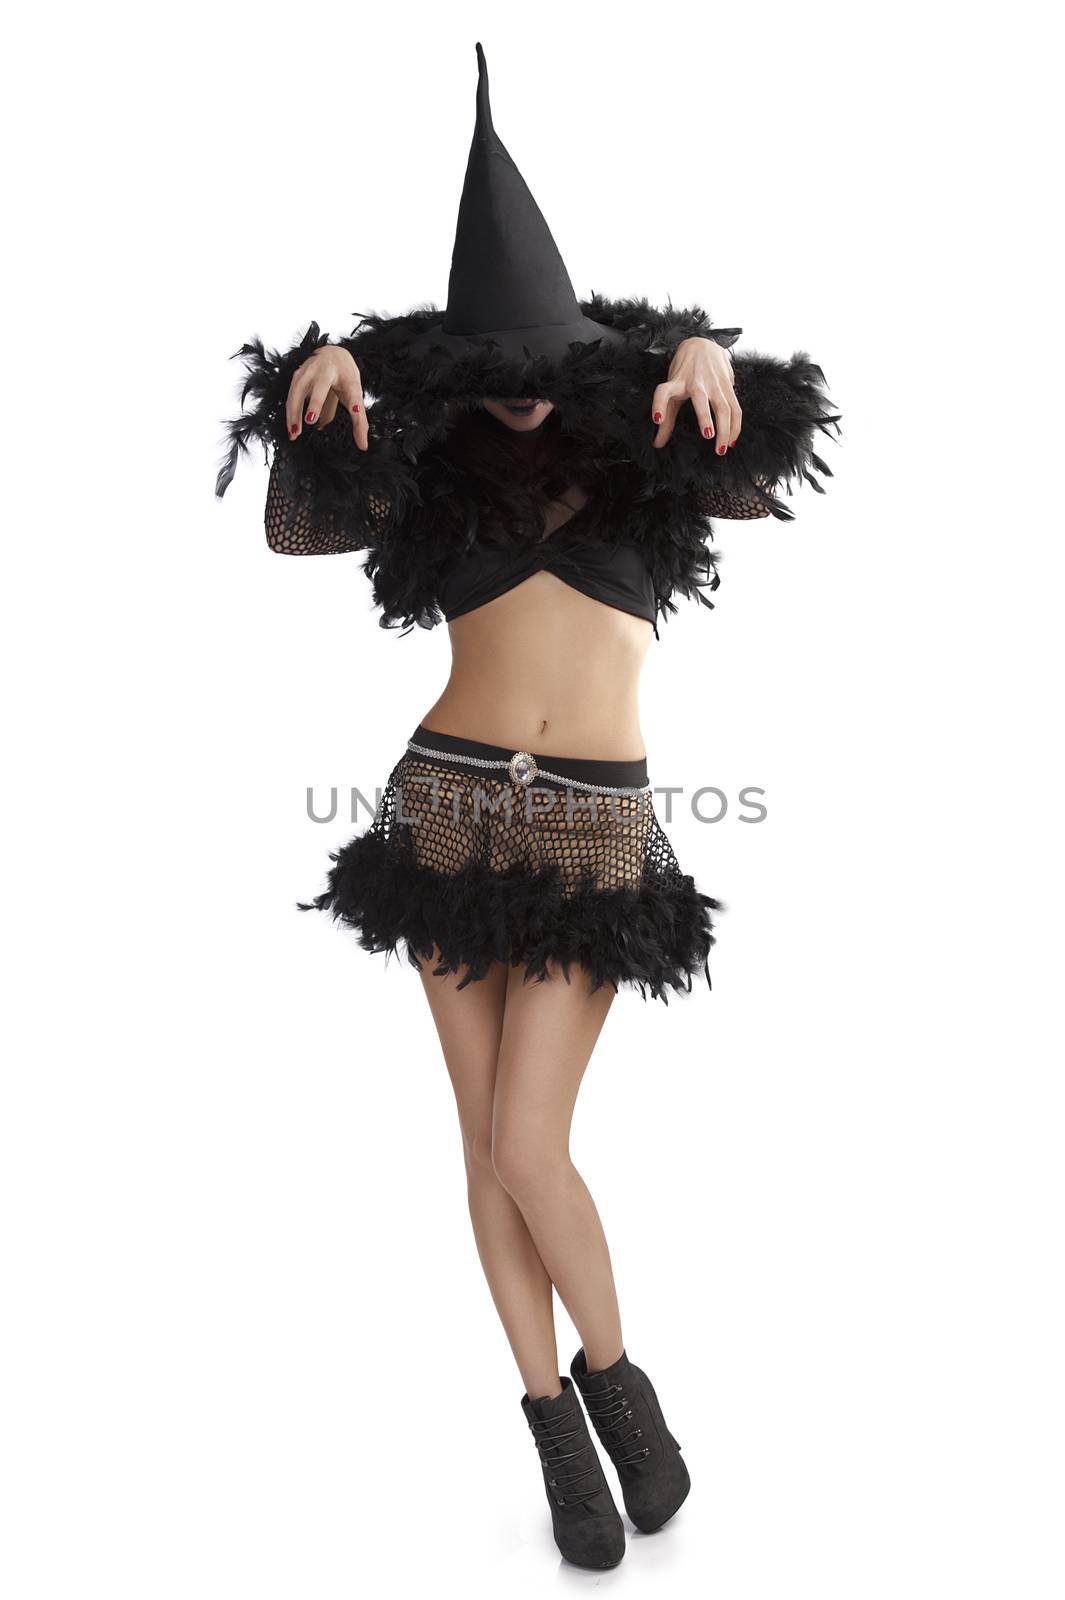 very pretty young brunette in black witch dress with hat and high heel ready for halloween in scary pose against white background